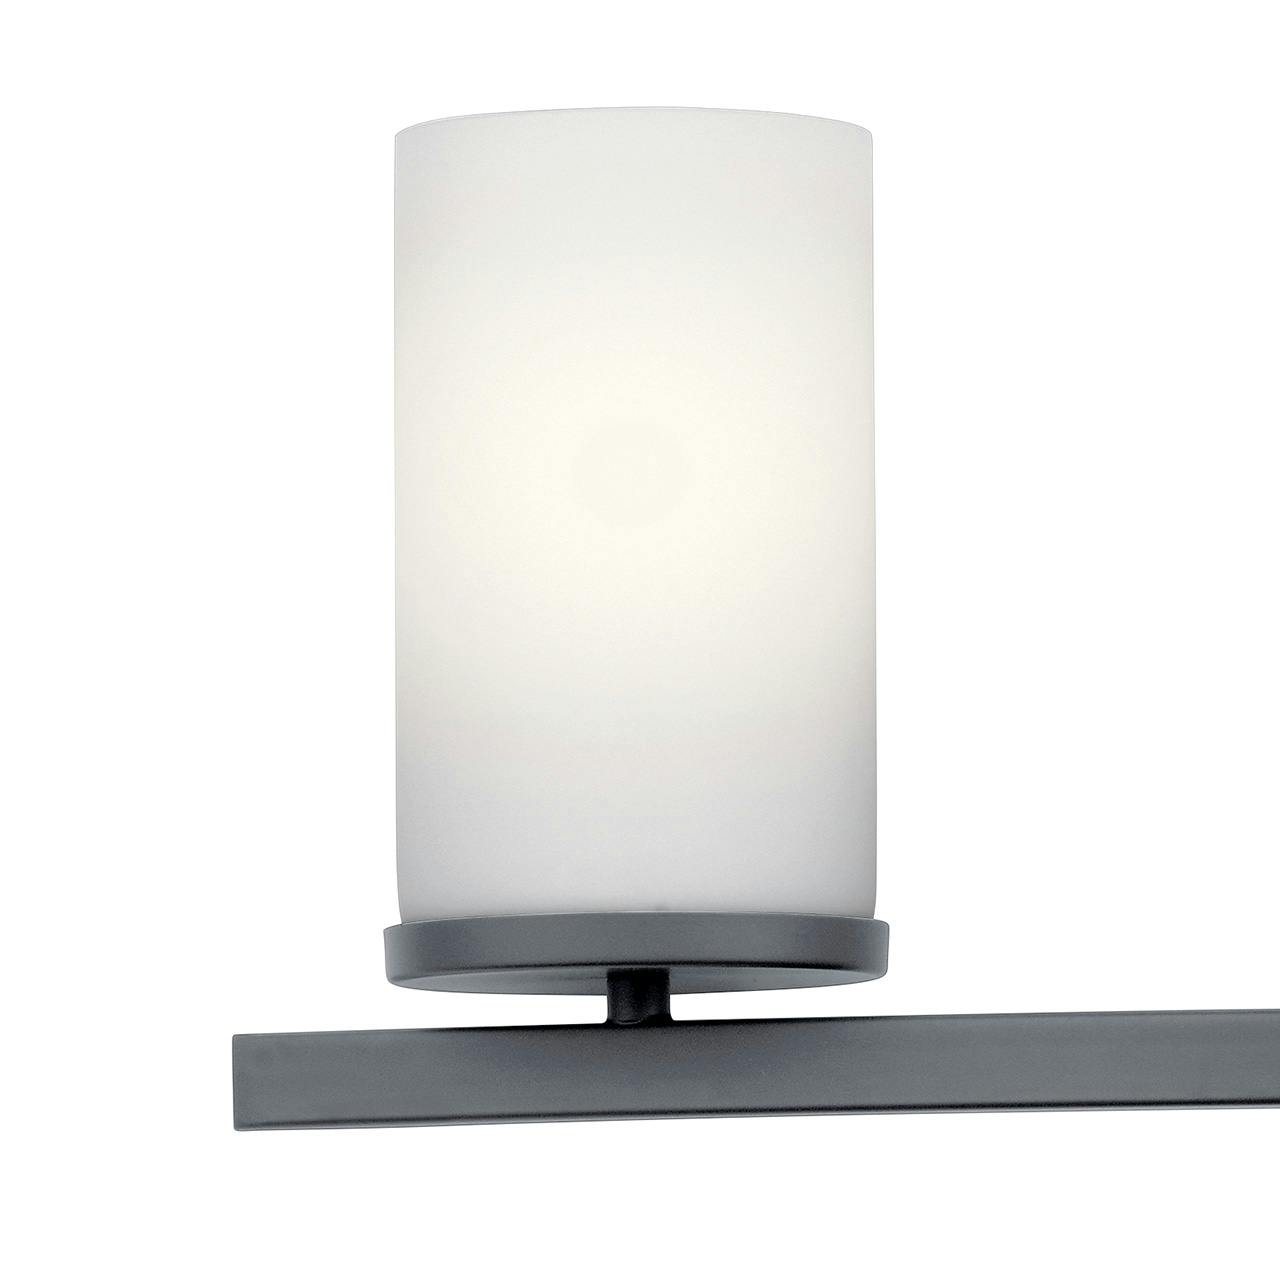 Close up view of the Crosby 4 Light Vanity Light Black on a white background